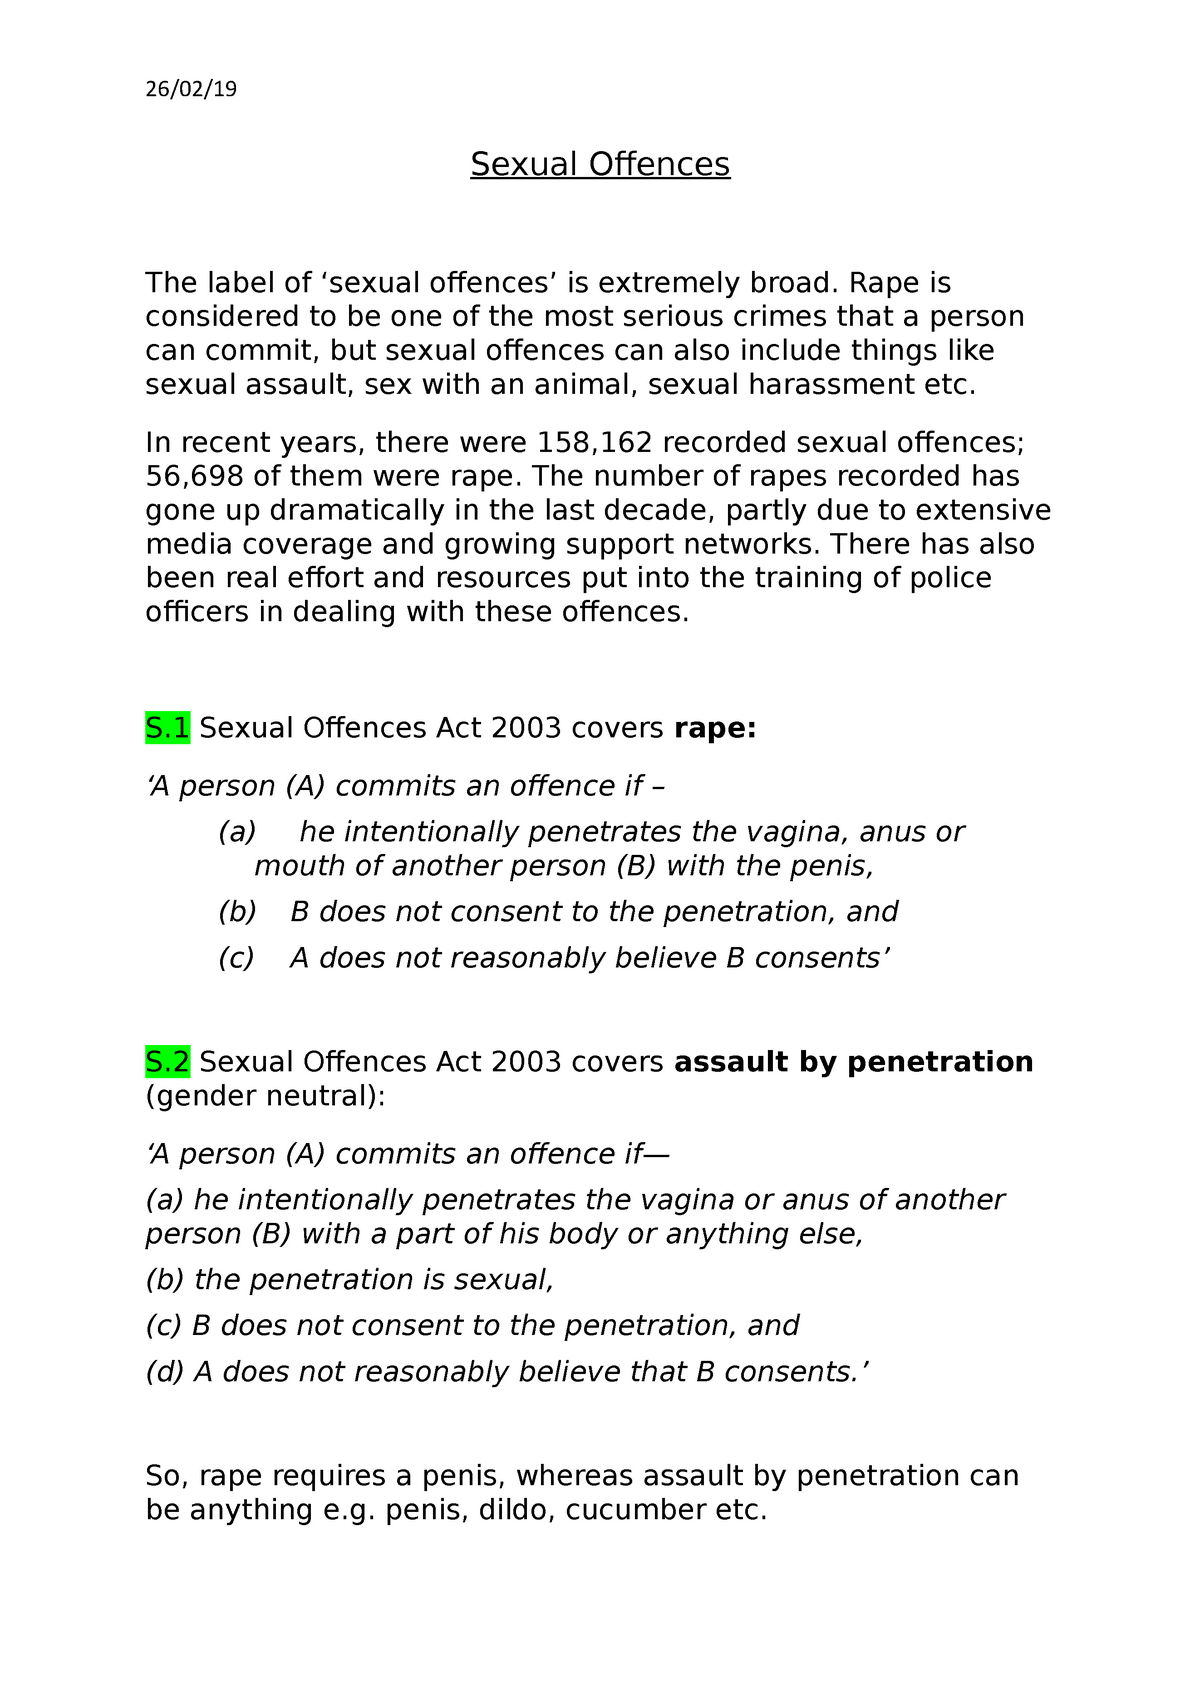 Sexual Offences Lydia Bleasedale Sexual Offences The Label Of ‘sexual Offences Is Extremely 0770